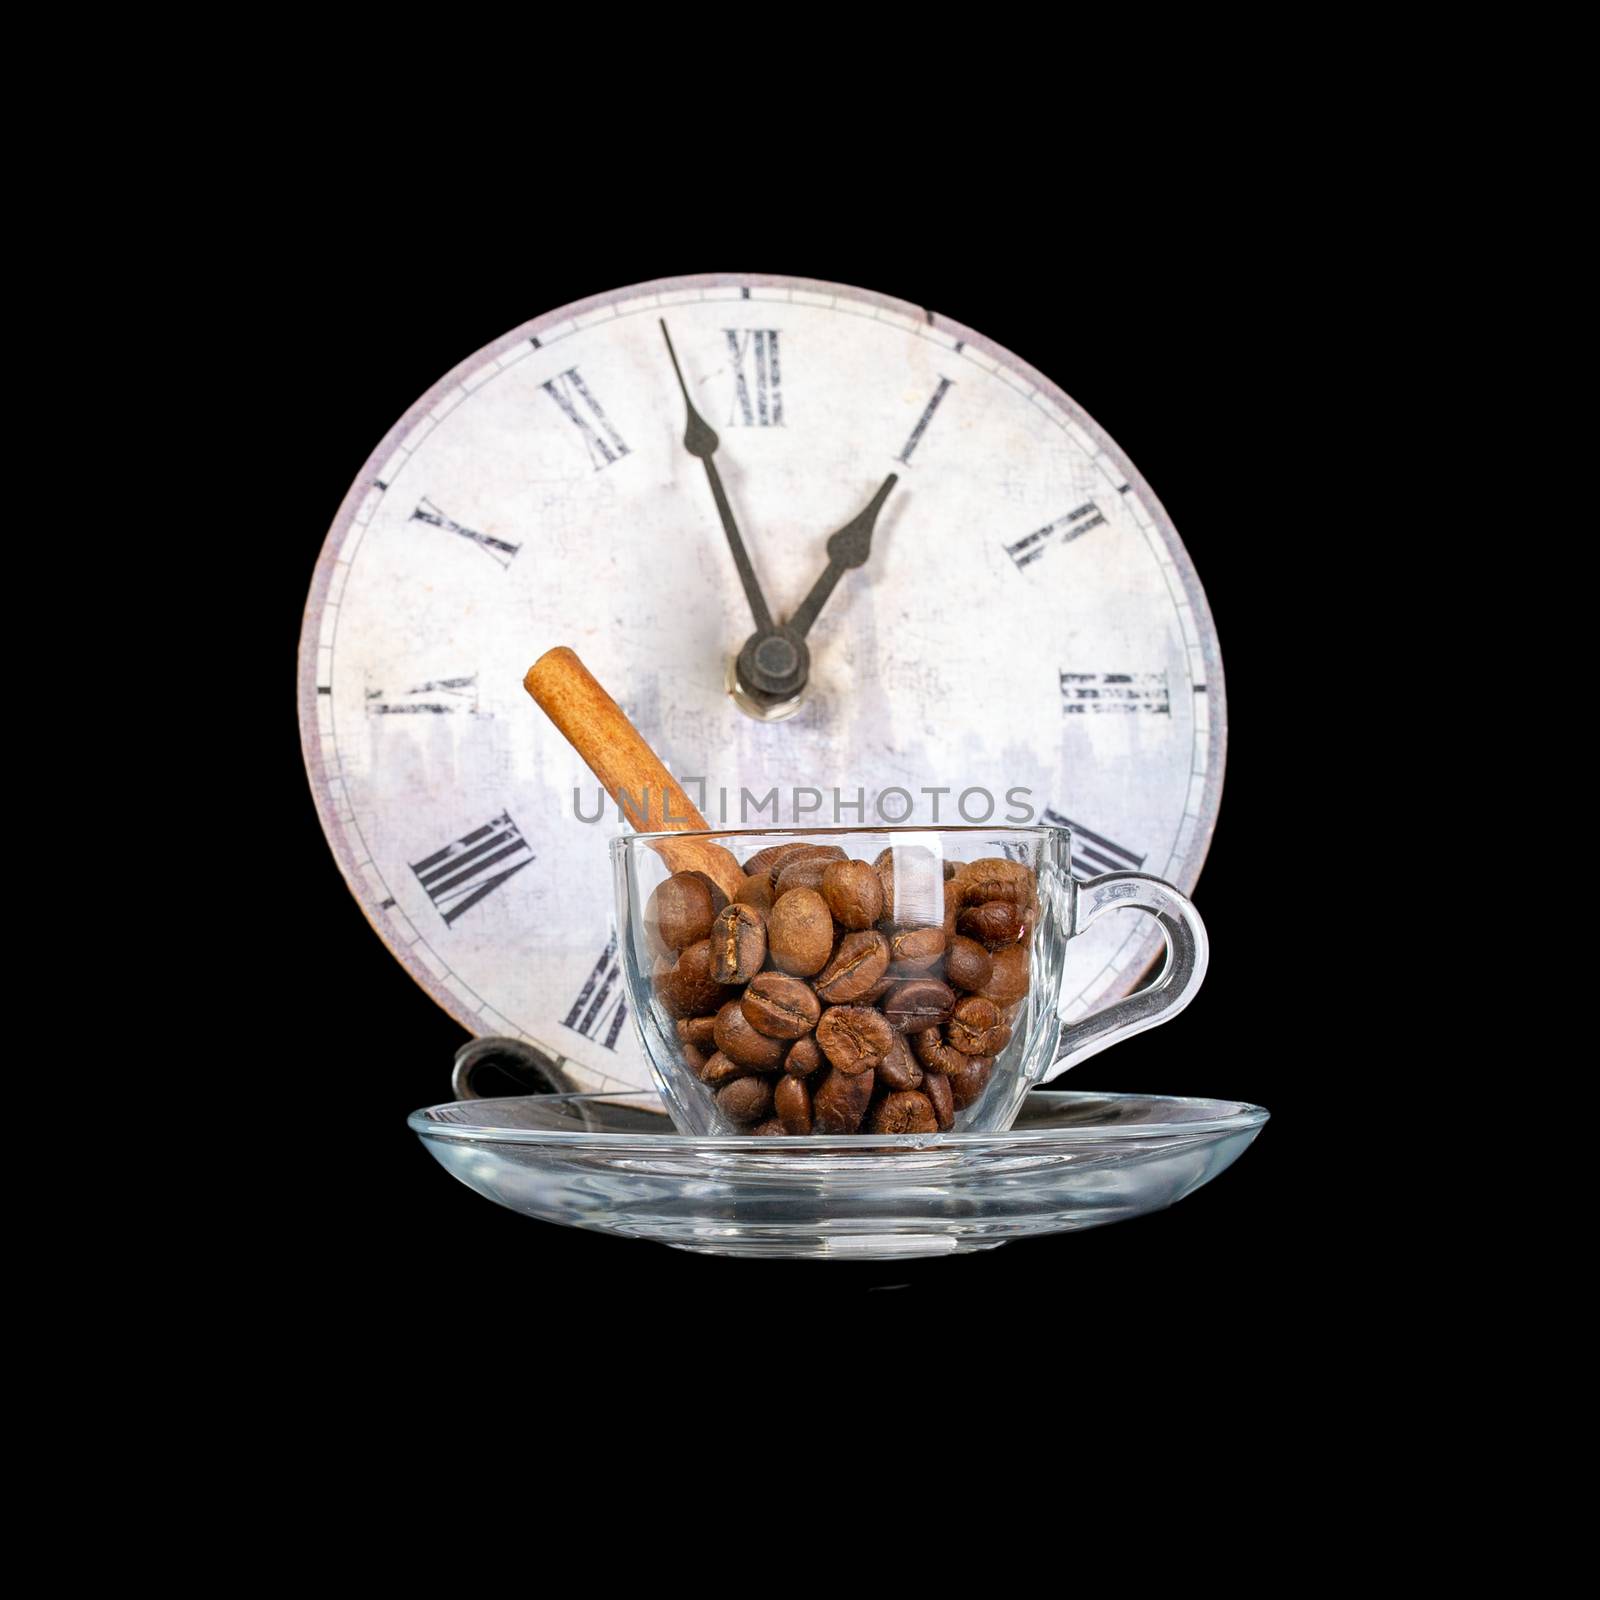 Coffee cup with grains isolated on a black background. Coffee beans and vanilla stick in a coffee cup on a saucer. Against the background of vintage watches.